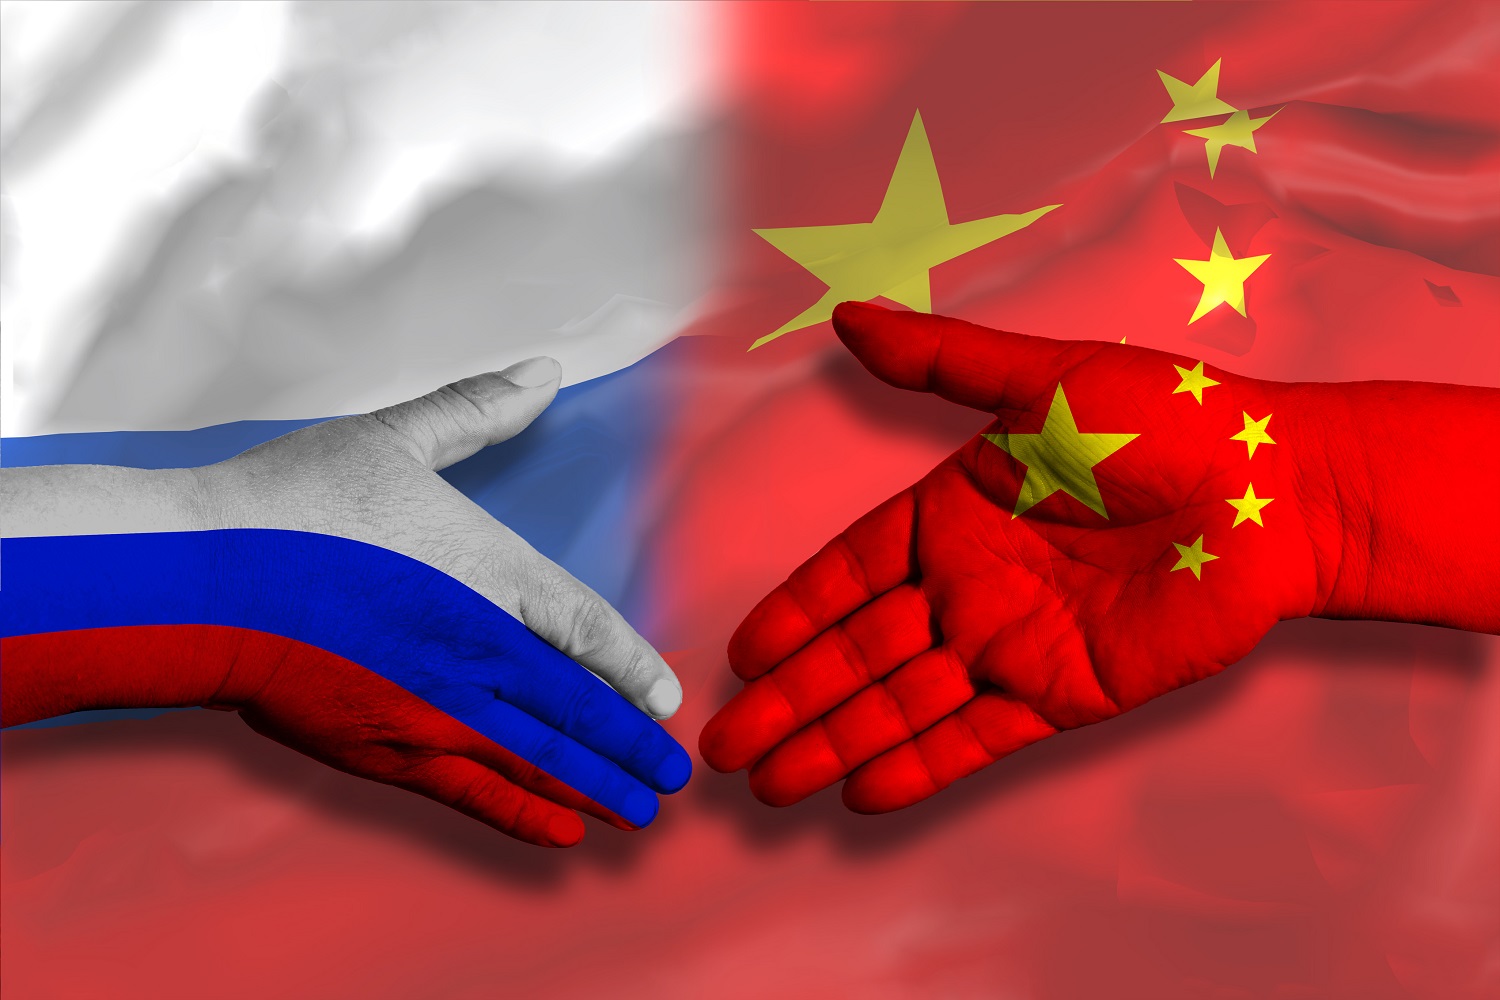 Two hands, one decorated in the colors of the Chinese flag and the other in the colors of the Russian flag, move together as if to shake hands against the backdrop of both countries’ flags.